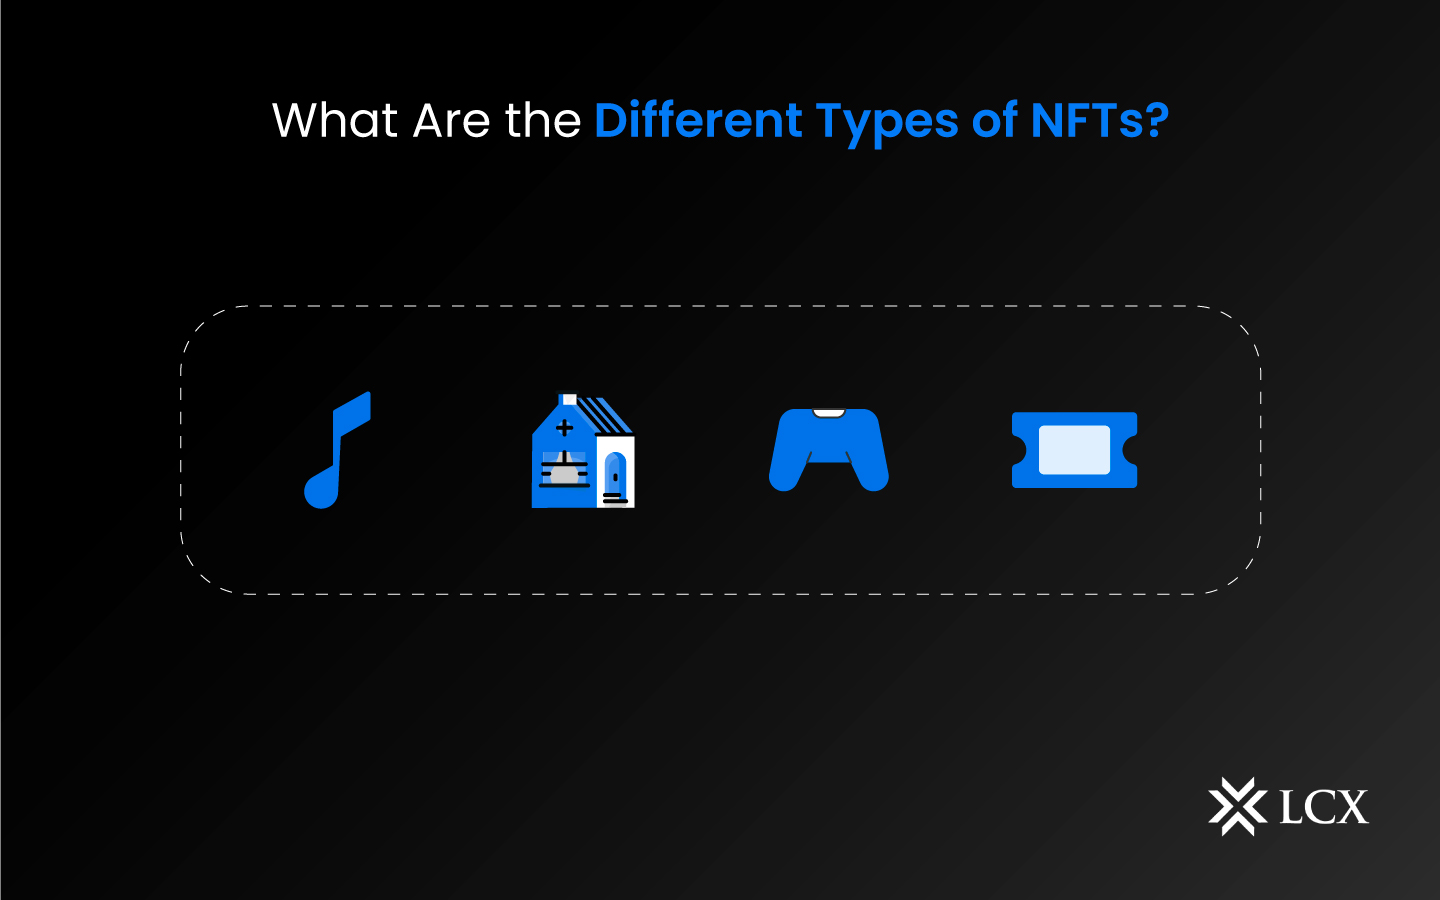 What are the different types of NFTs?